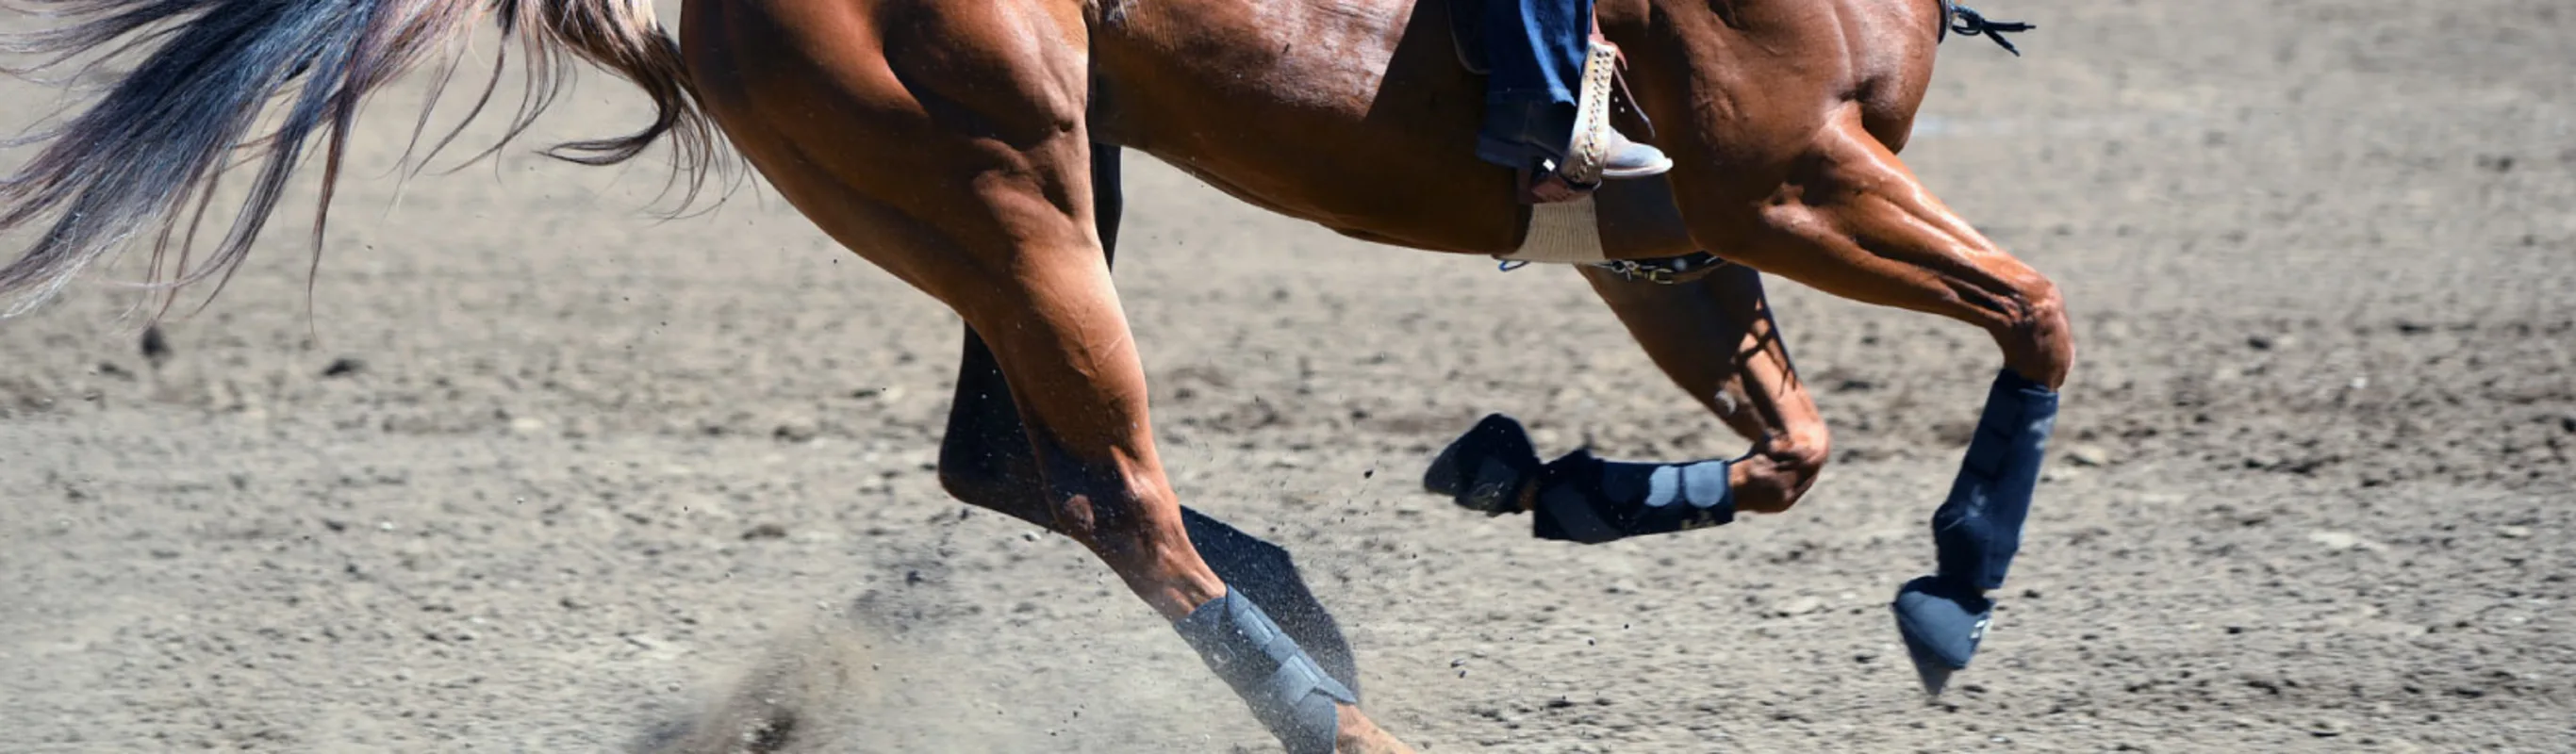 Lower half of a performance horse galloping through dirt